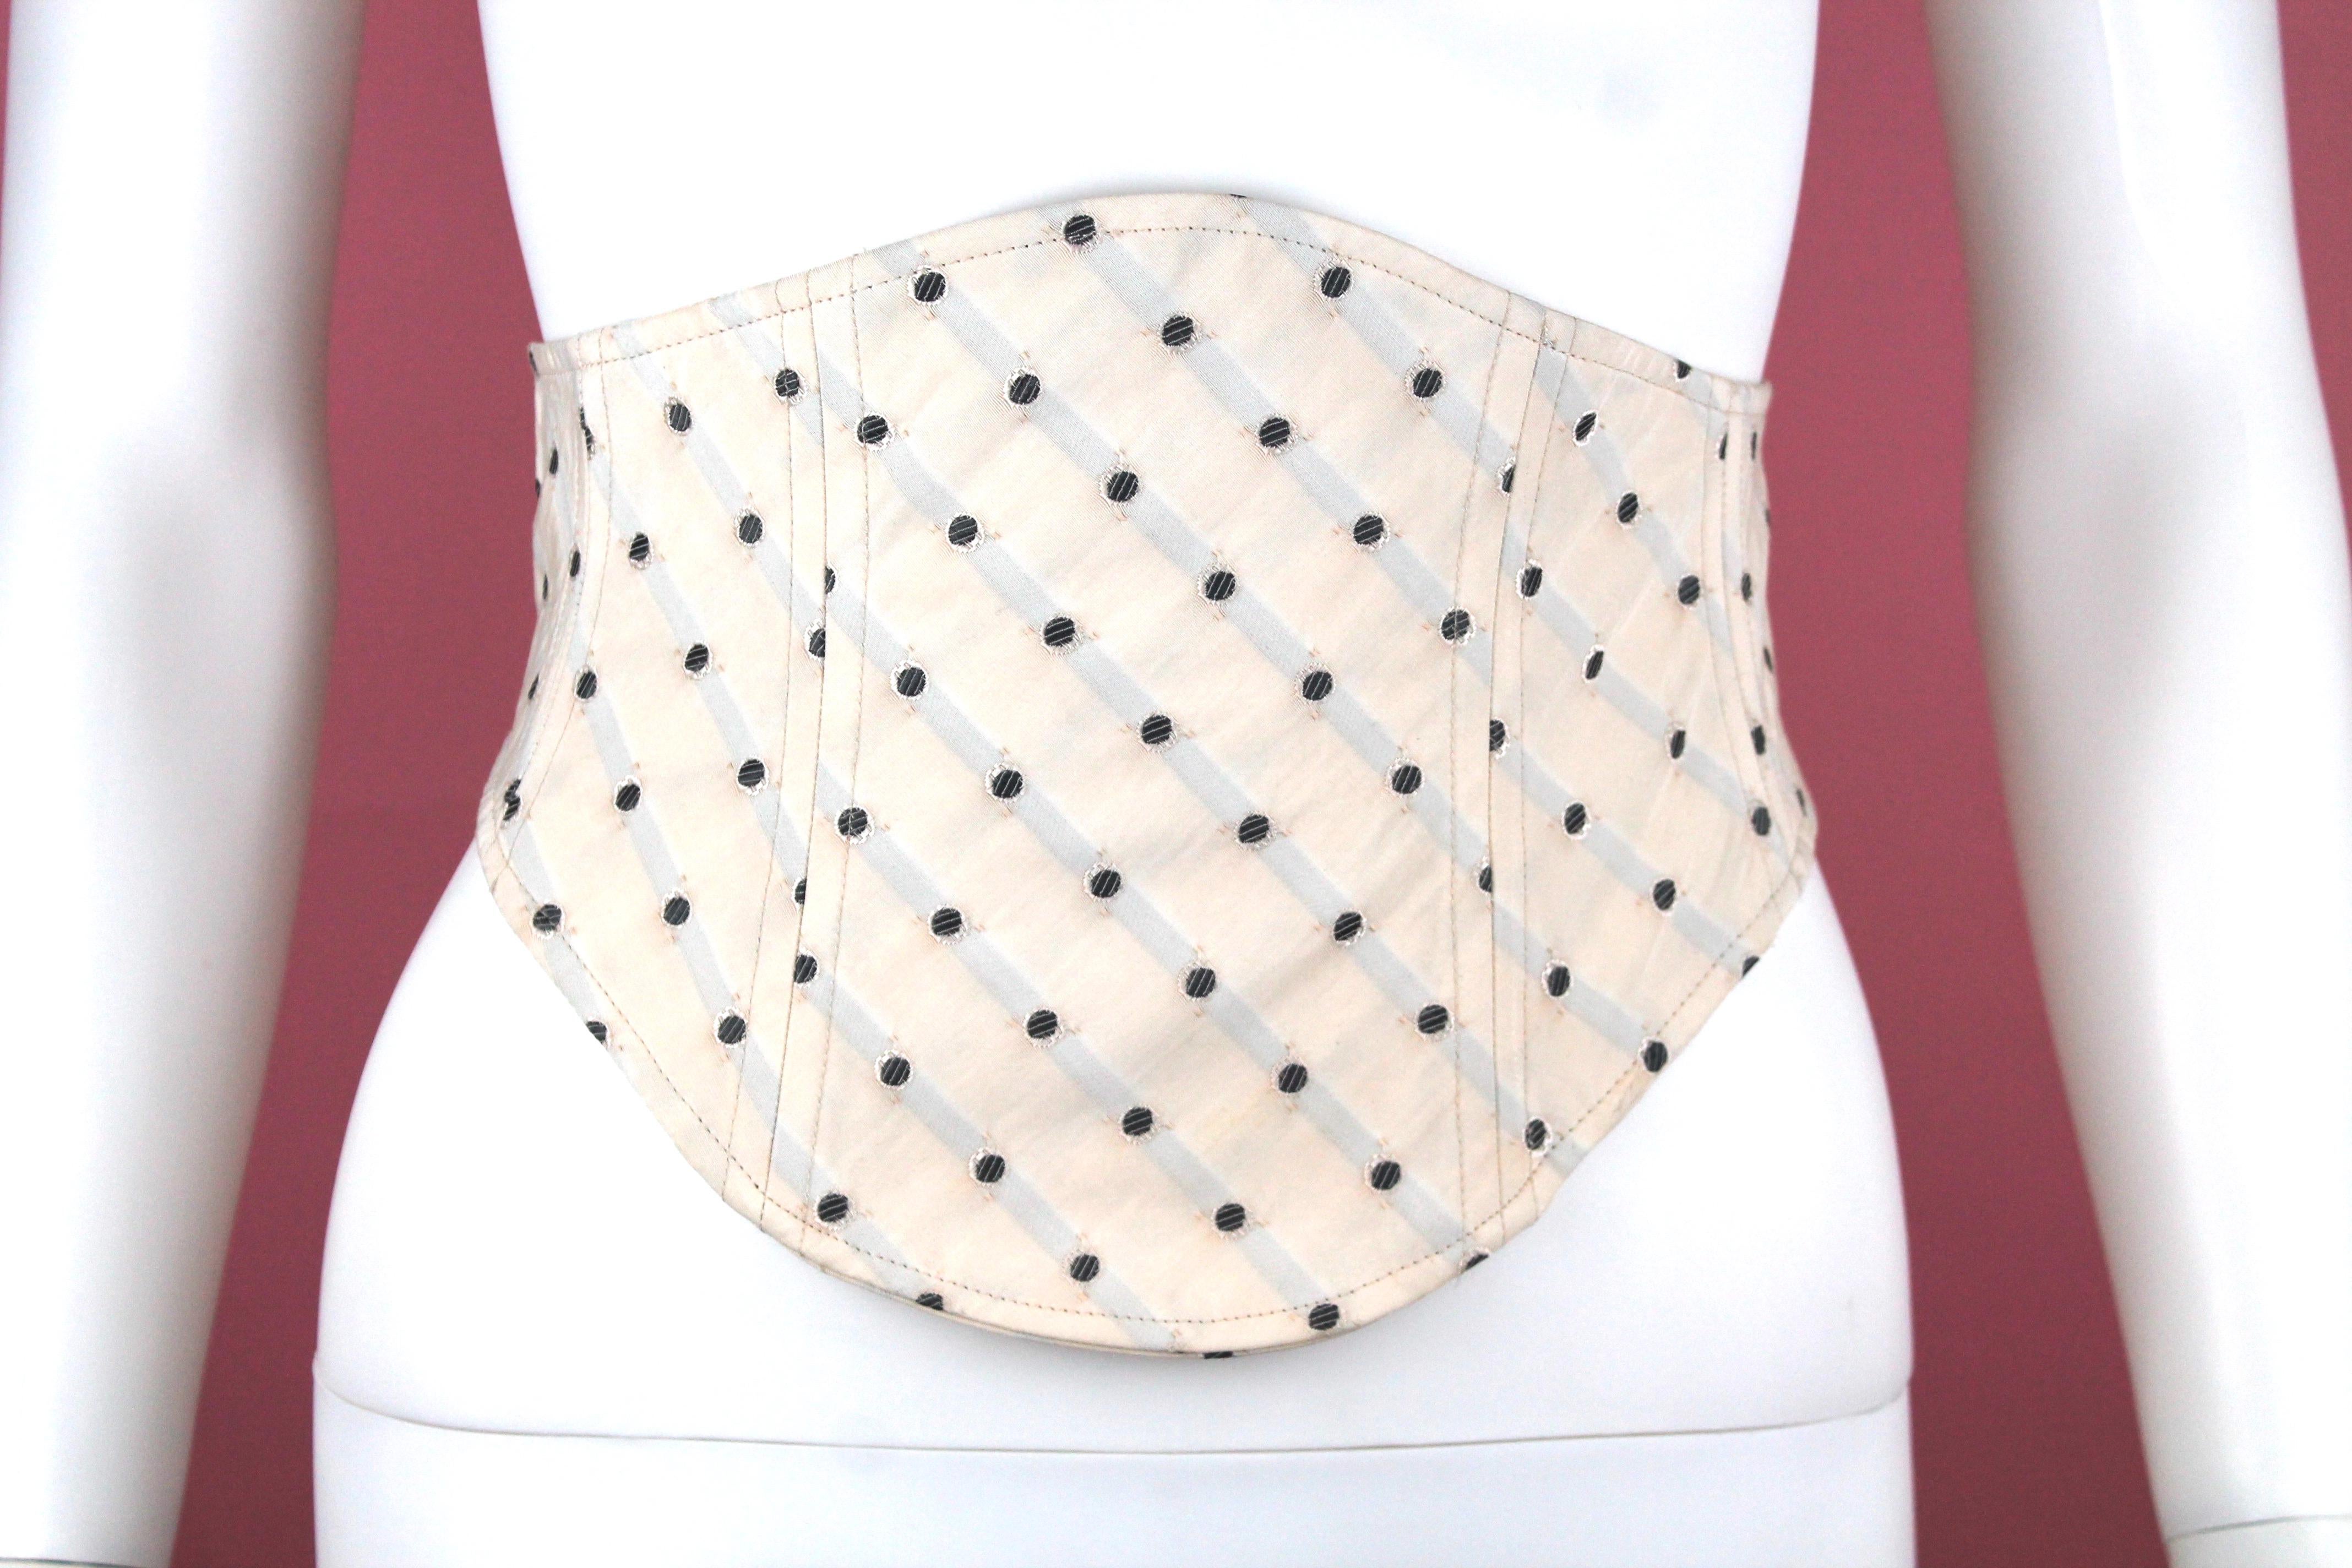 -Adorable cream waist cincher from Vivienne Westwood Red Label 
-Polka dot pattern with faint blue stripes all over 
-Dating of this piece is approximately Spring Summer 2010 
-Made of cotton blend fabric, has boning throughout
-Sized M 
-Made in